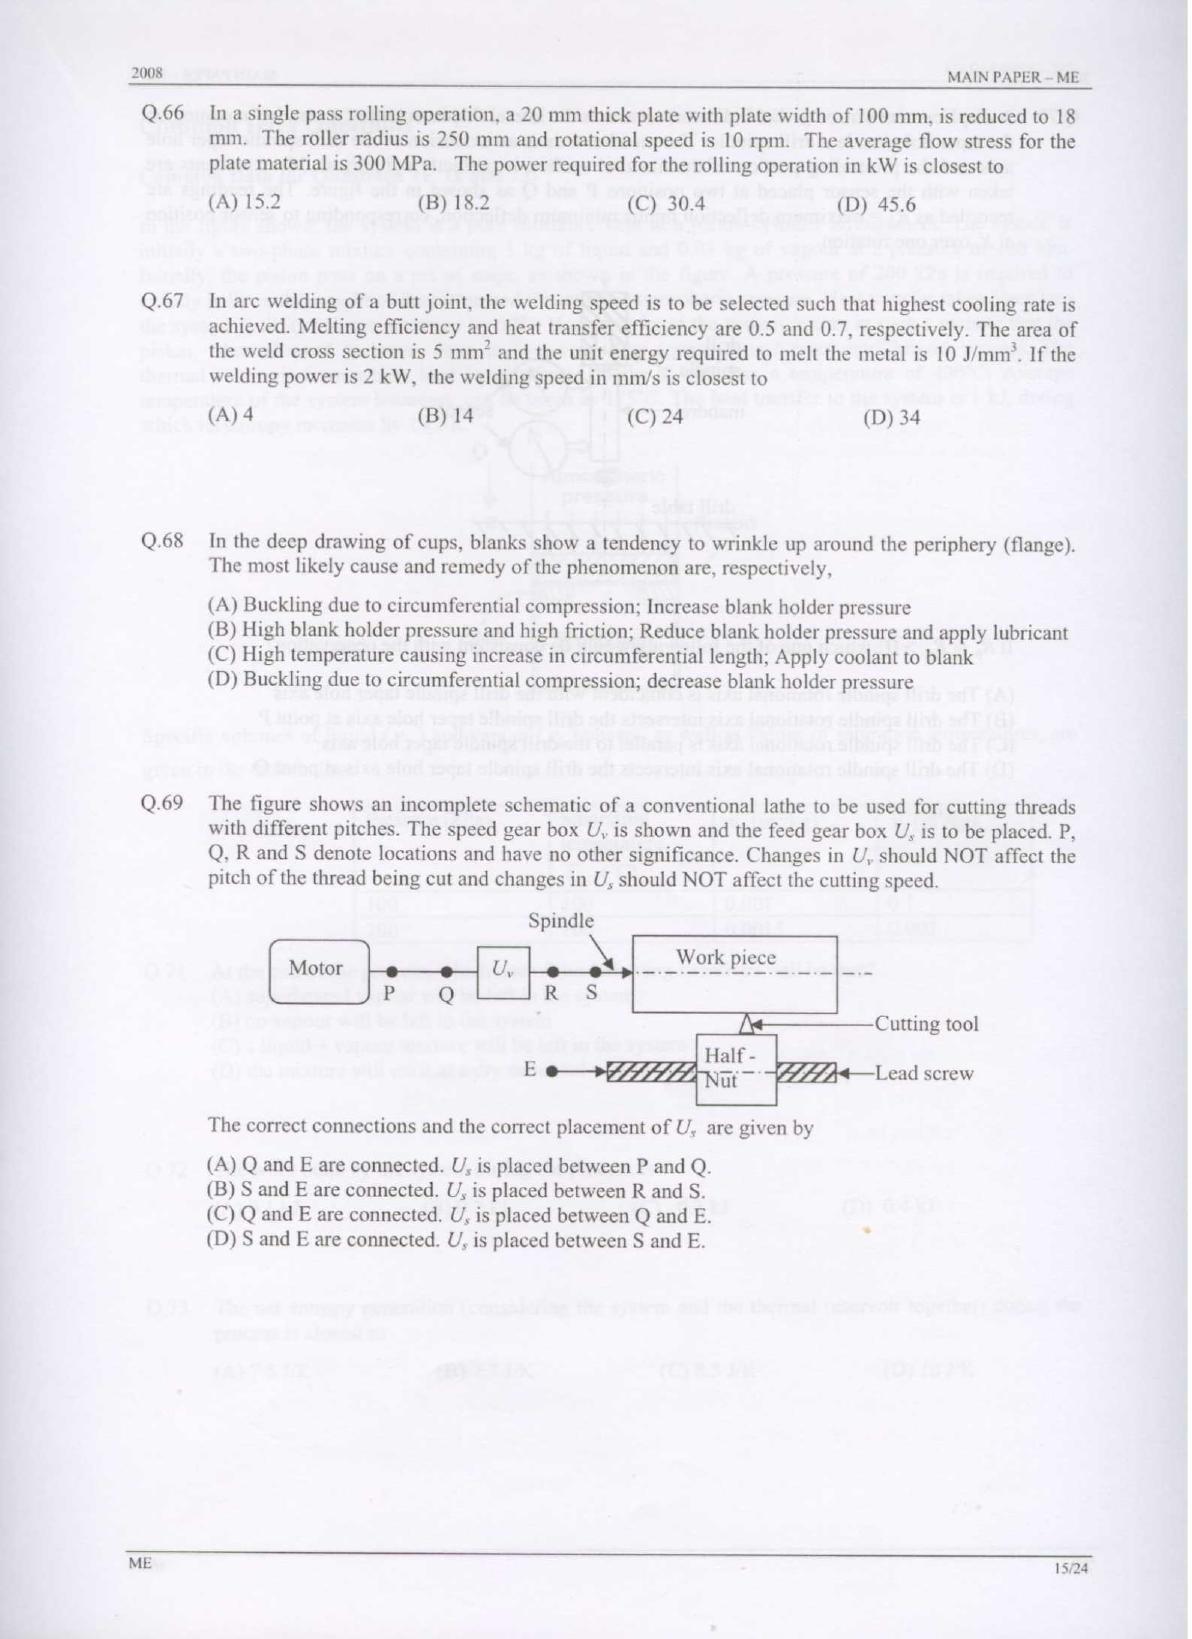 GATE 2008 Mechanical Engineering (ME) Question Paper with Answer Key - Page 15